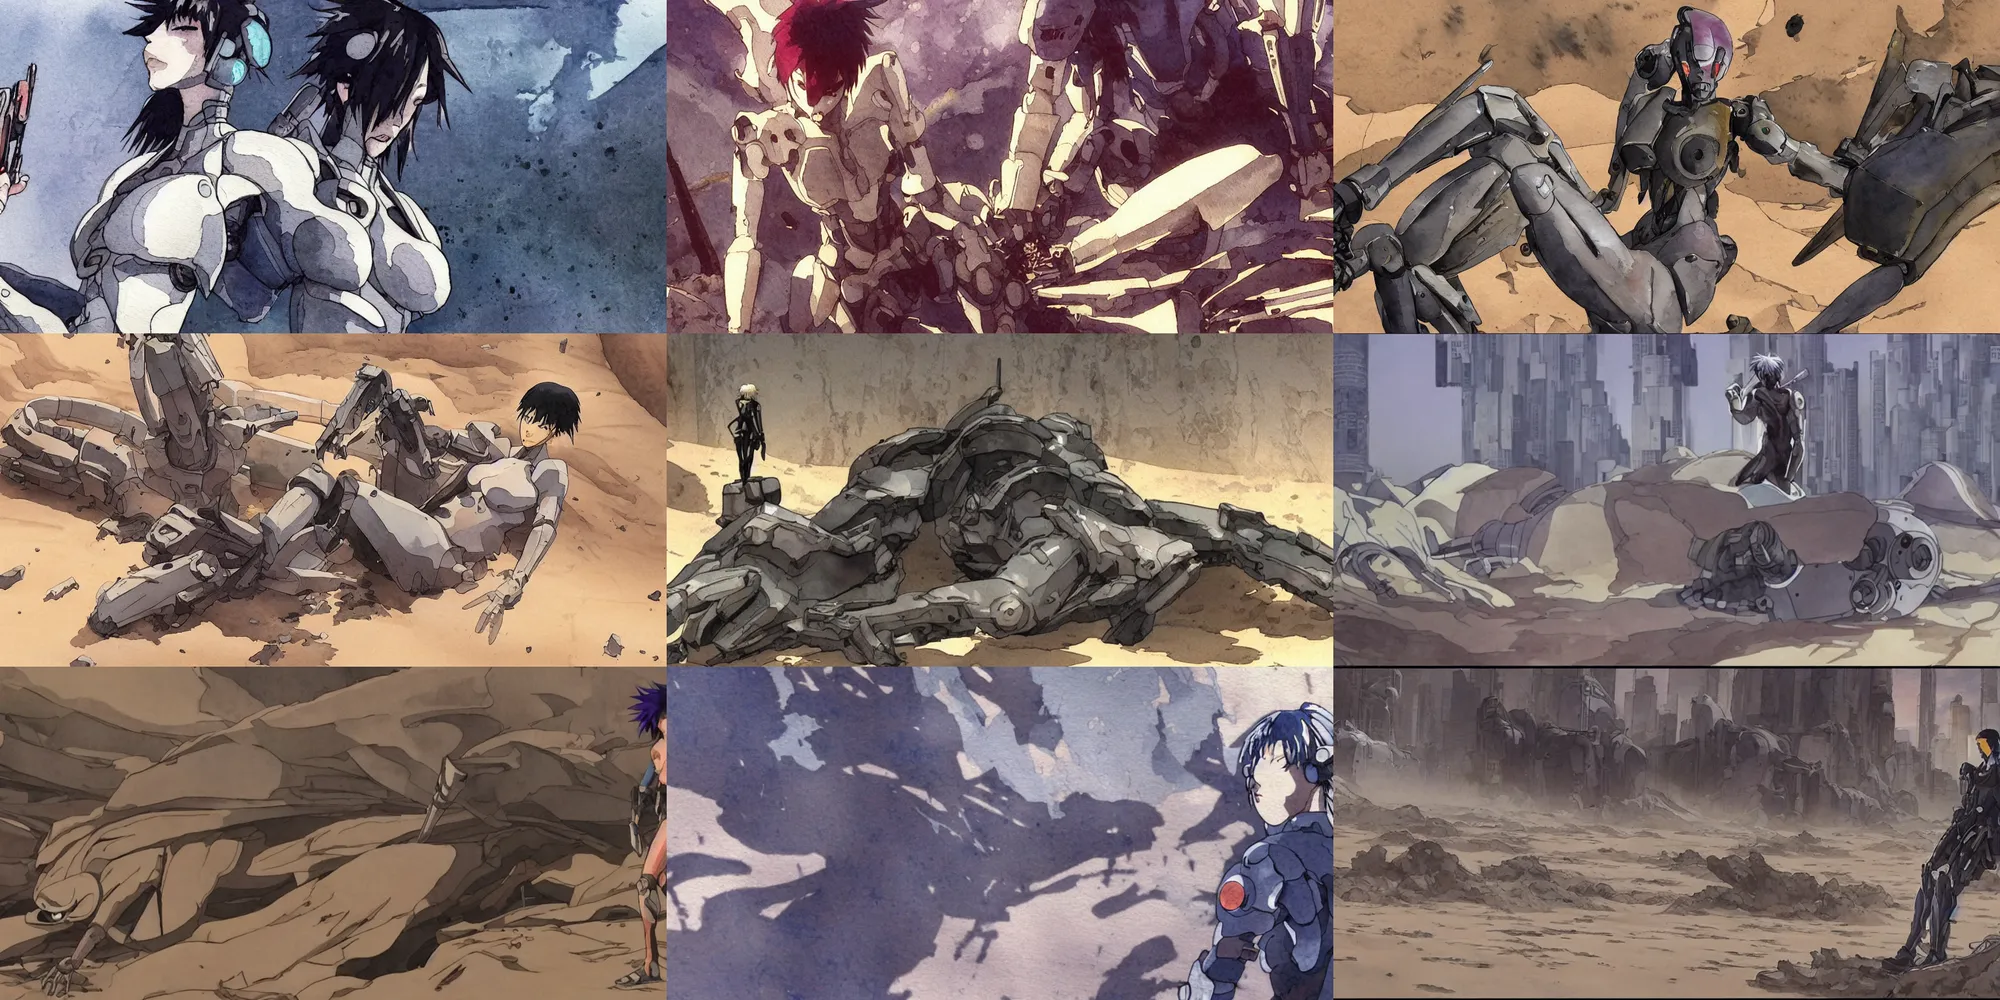 Prompt: incredible screenshot, simple watercolor, masamune shirow ghost in the shell movie scene close up broken Kusanagi, uncovering a rusting robot ribcage and spine poking out of sand dunes, in the desert, crazy looking rocks, chasm, death vally, cracks, brown mud, dust, impossible geometry, falling apart, take cover, bullet holes,last man standing, memorable scene, red, blue, orange, cool hair, melting, danger, death, chaos, bodies on the ground, heavy rain, pipes, metalic reflections, refraction, bounce light, phil hale,Yoji Shinkawa, bright rim light, hd, 4k, remaster, dynamic camera angle, deep 3 point perspective, fish eye, dynamic scene